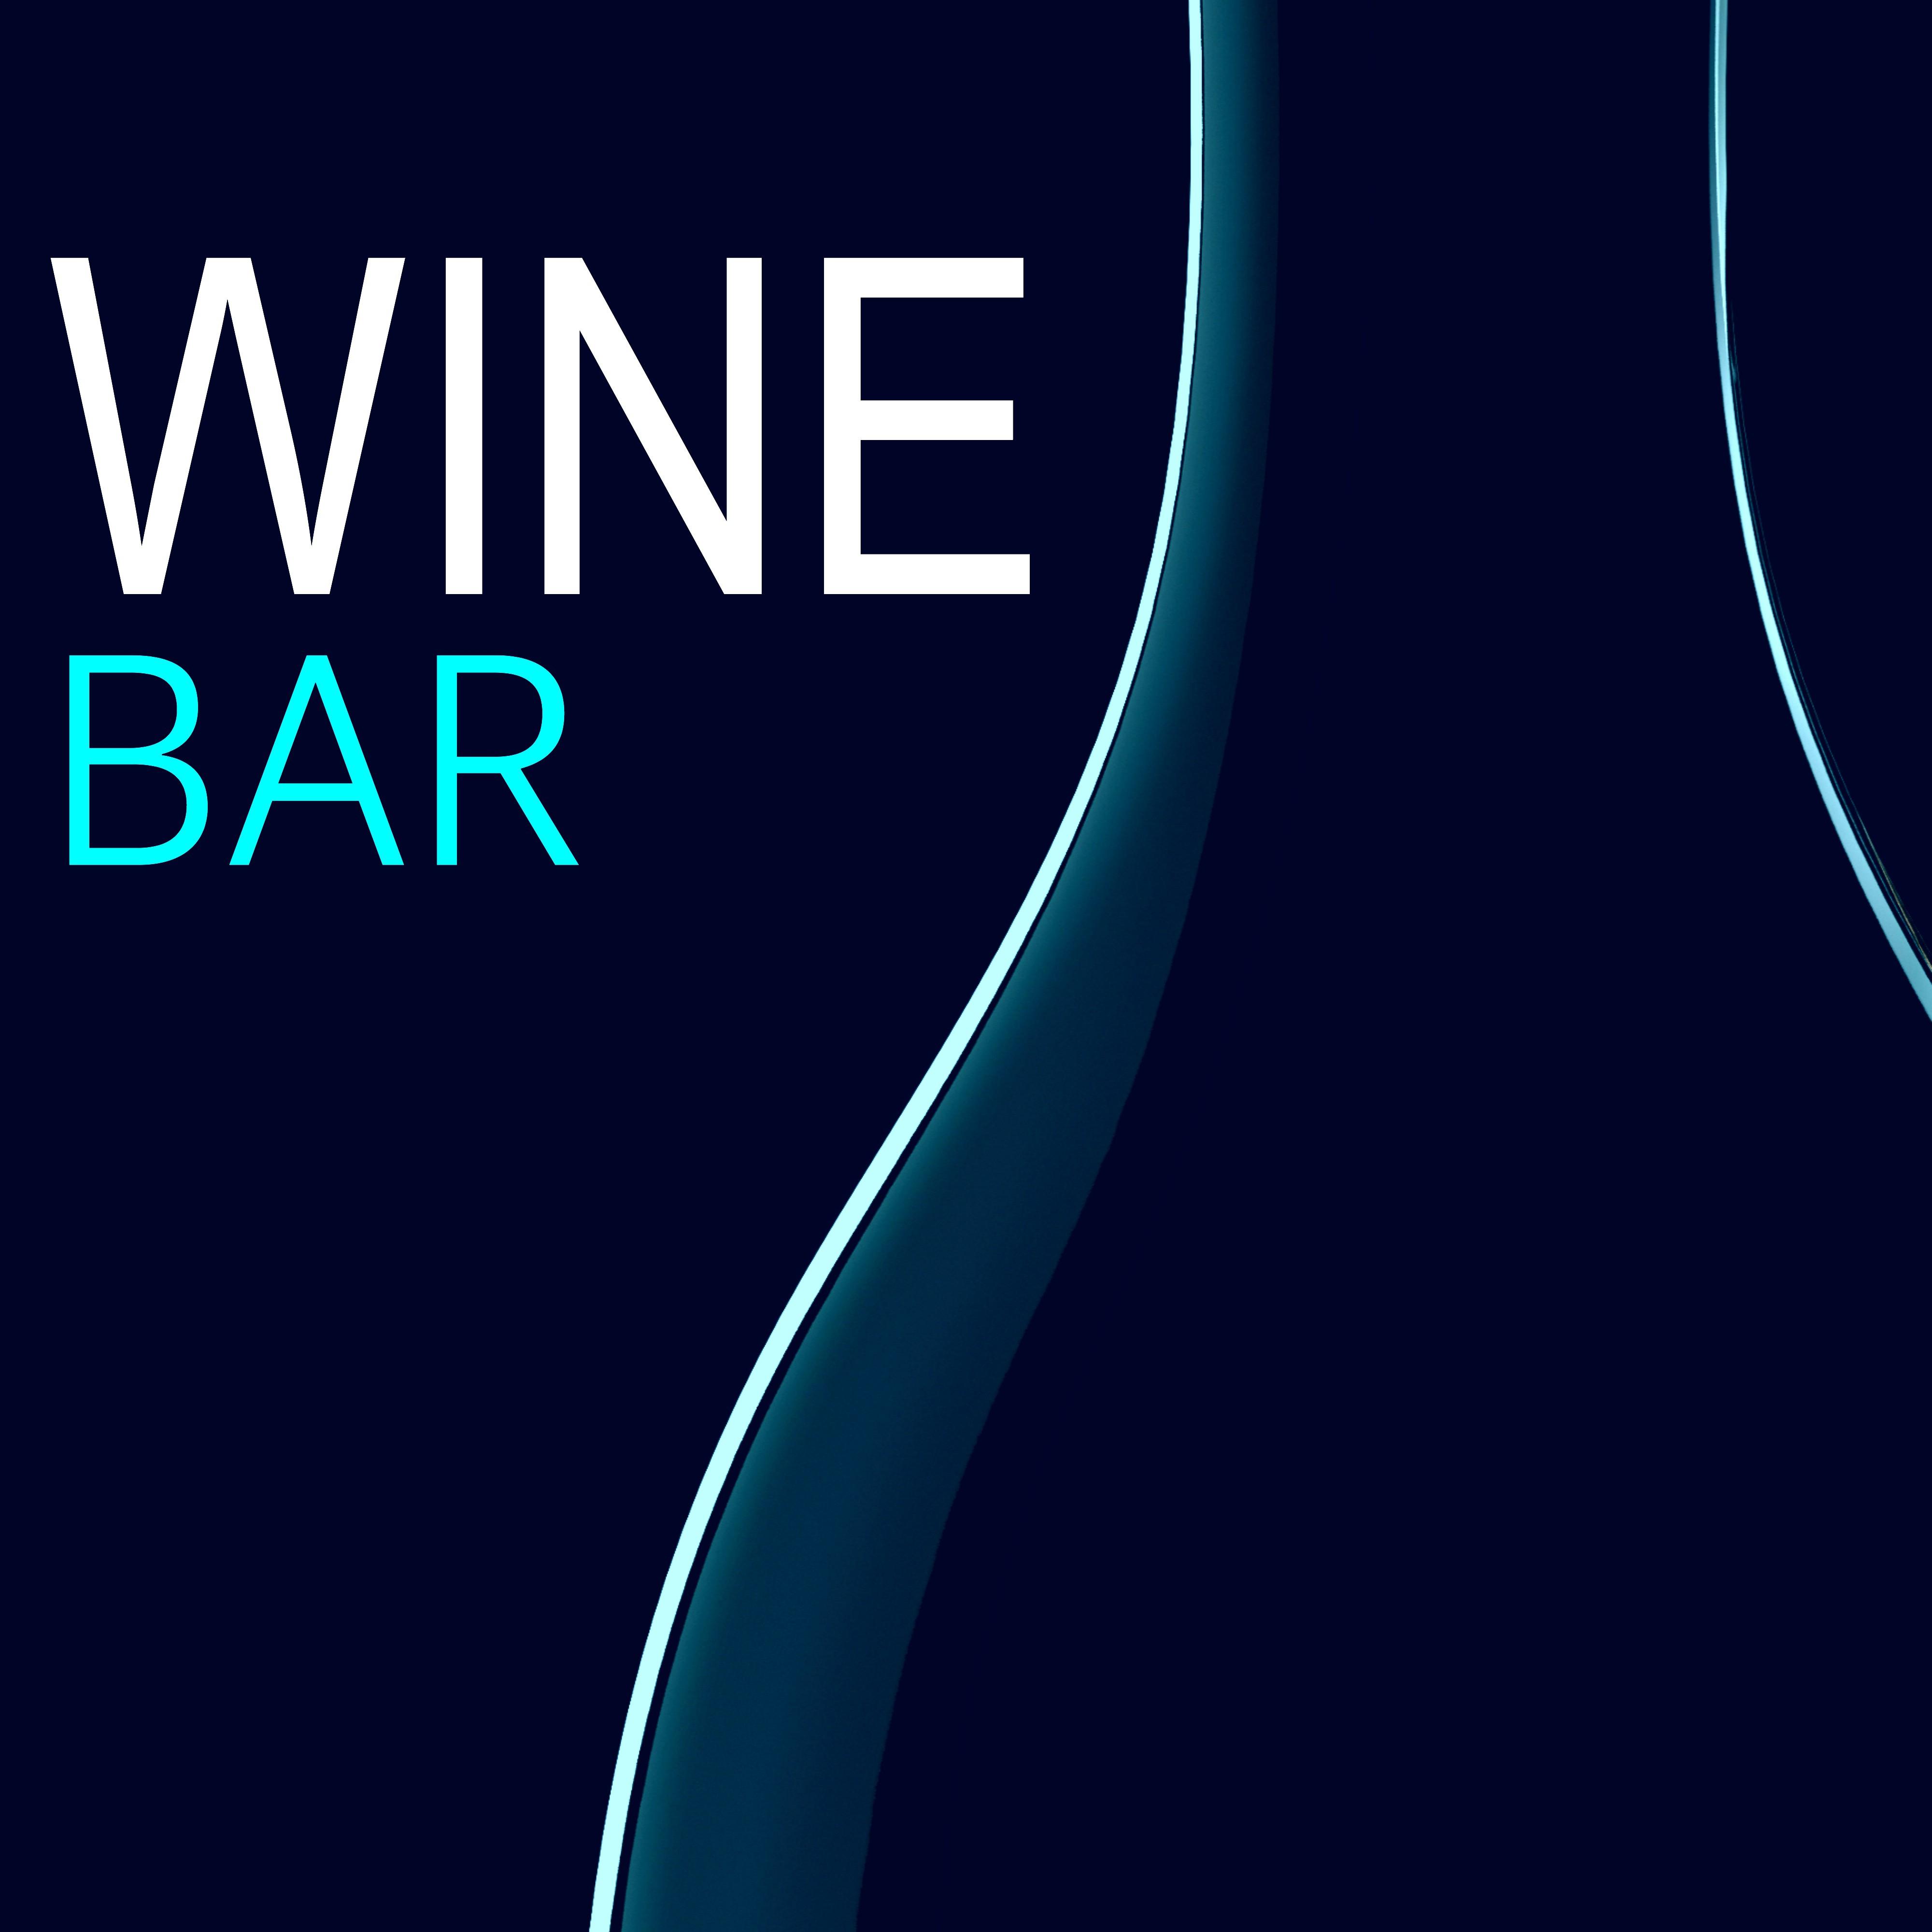 Wine Bar - Lounge Music Bar Chill Out Dj for Party Night & Party Mood